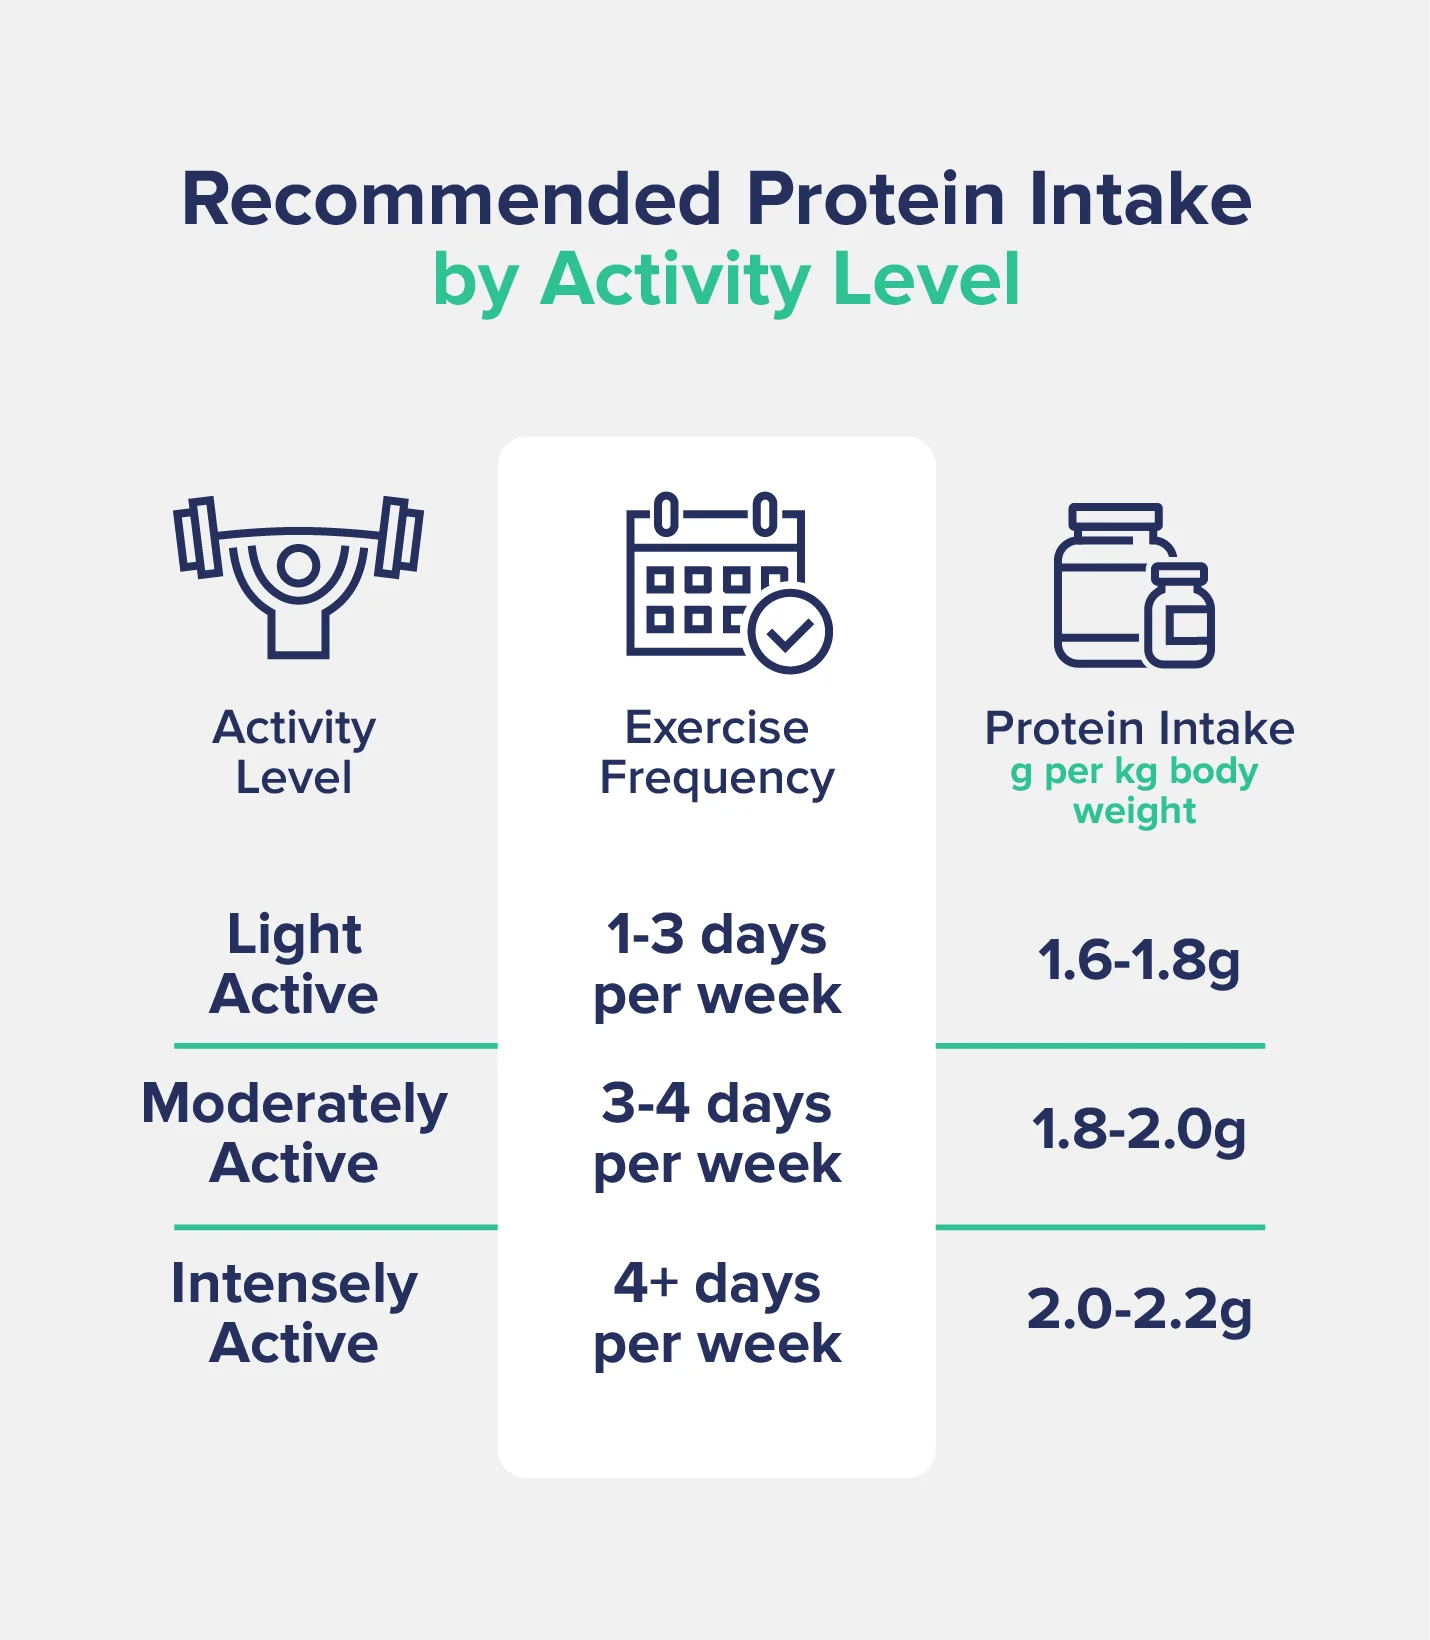 A graphic entitled "Recommended Protein Intake by Activity Level", displaying a table that correlates activity level and exercise frequency with the appropriate protein intake range on a gram-per-kilogram basis.